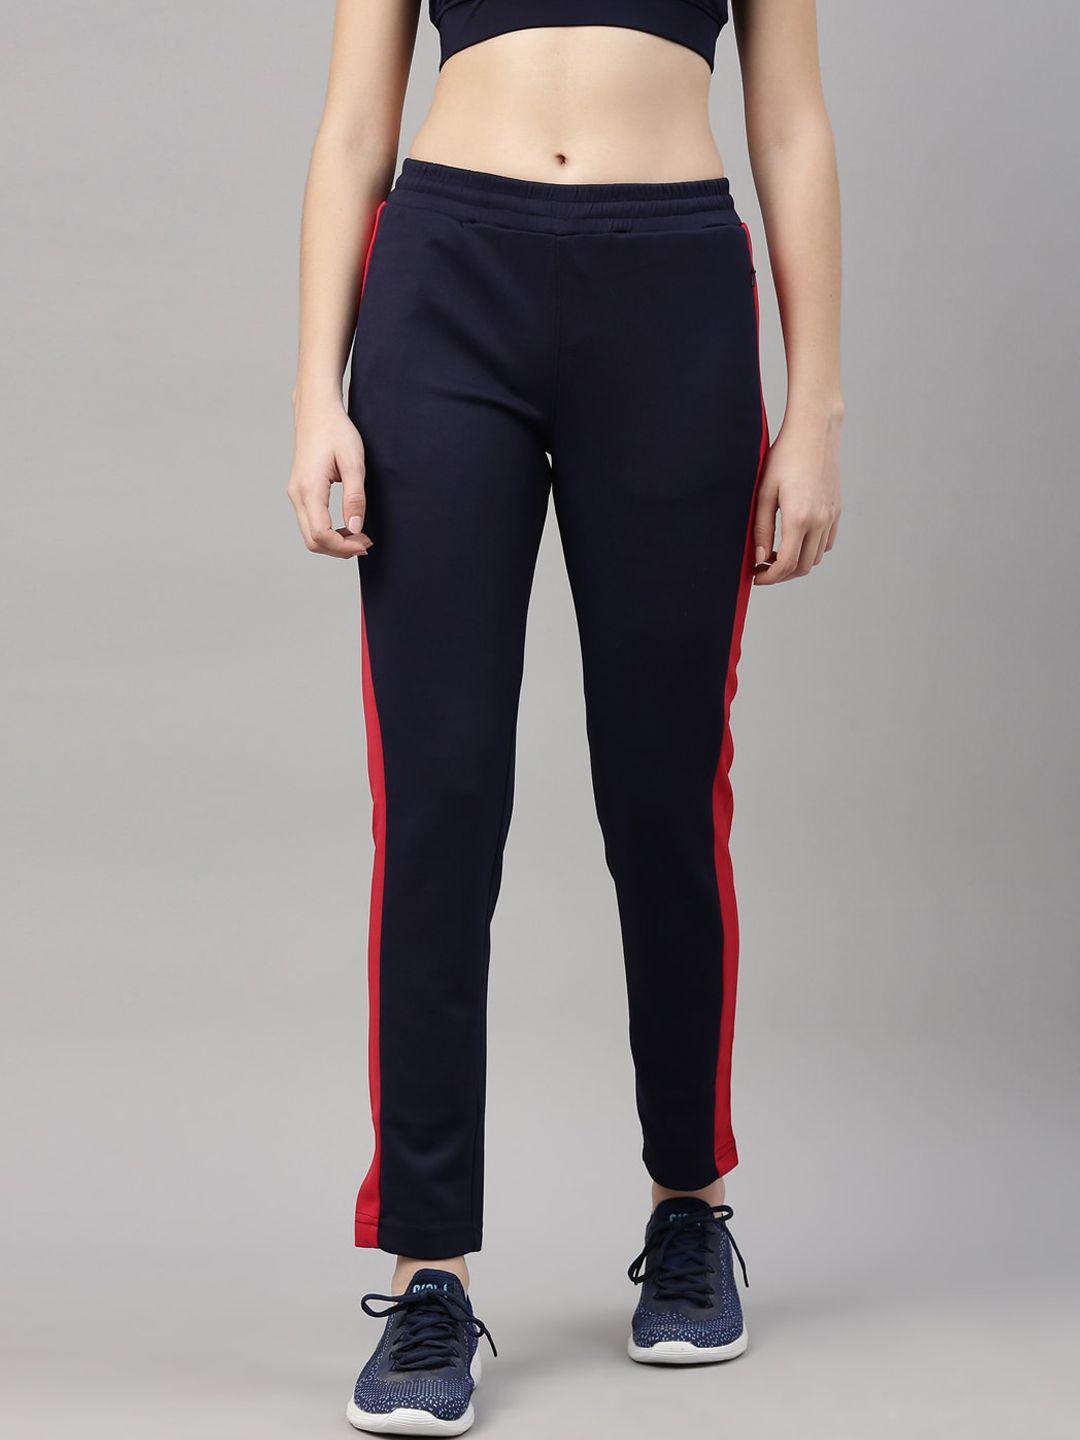 fila women navy blue & red solid track pants